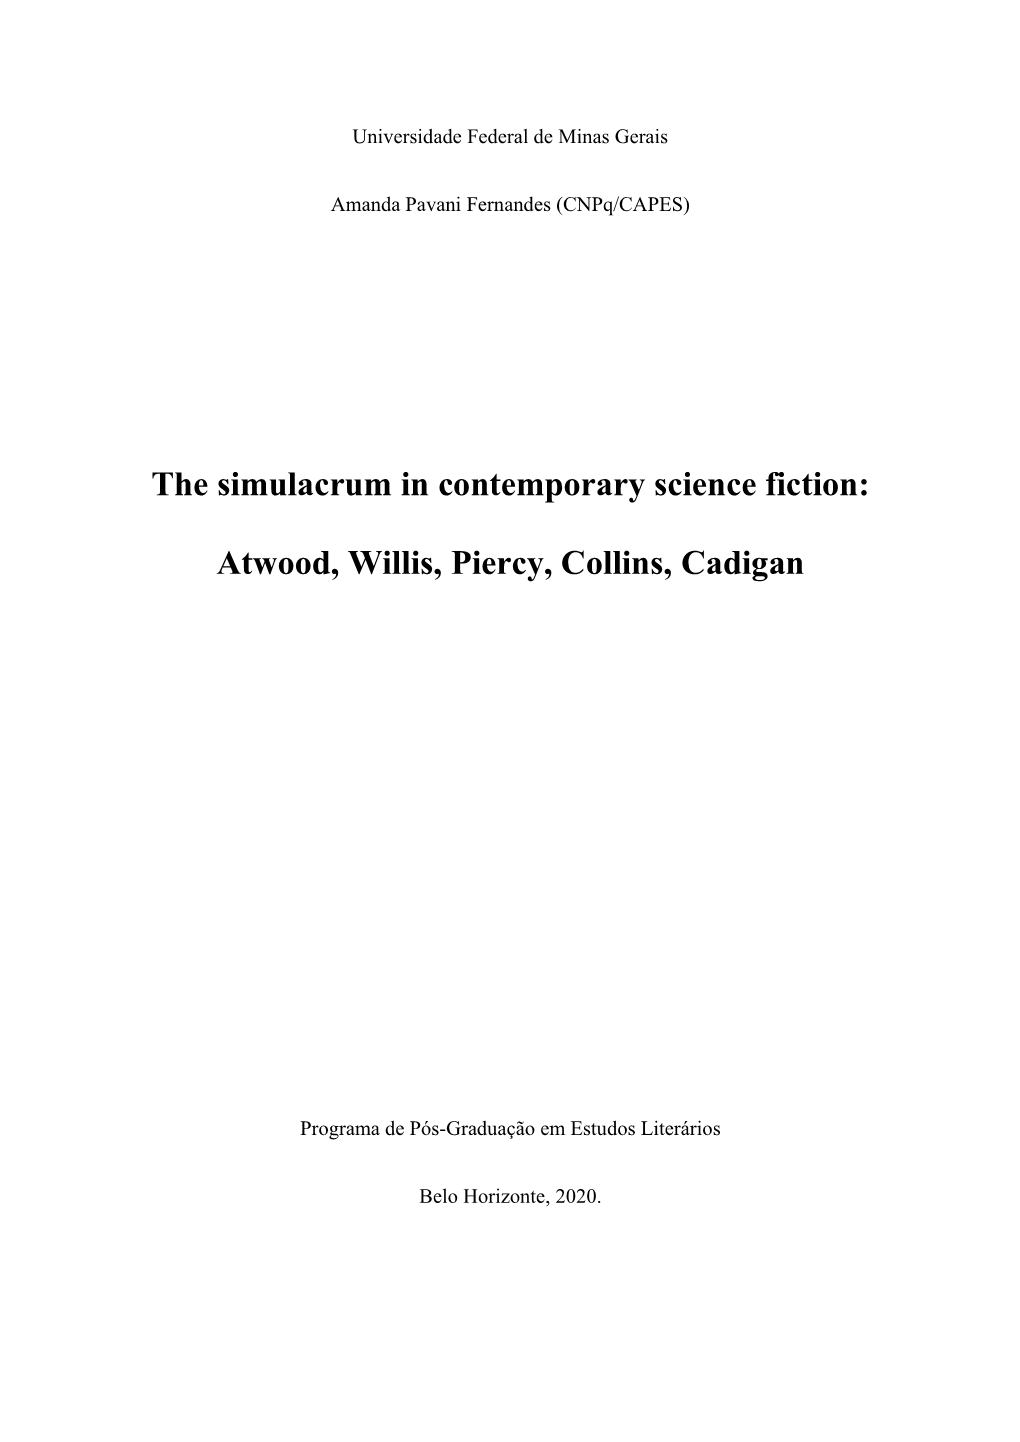 The Simulacrum in Contemporary Science Fiction: Atwood, Willis